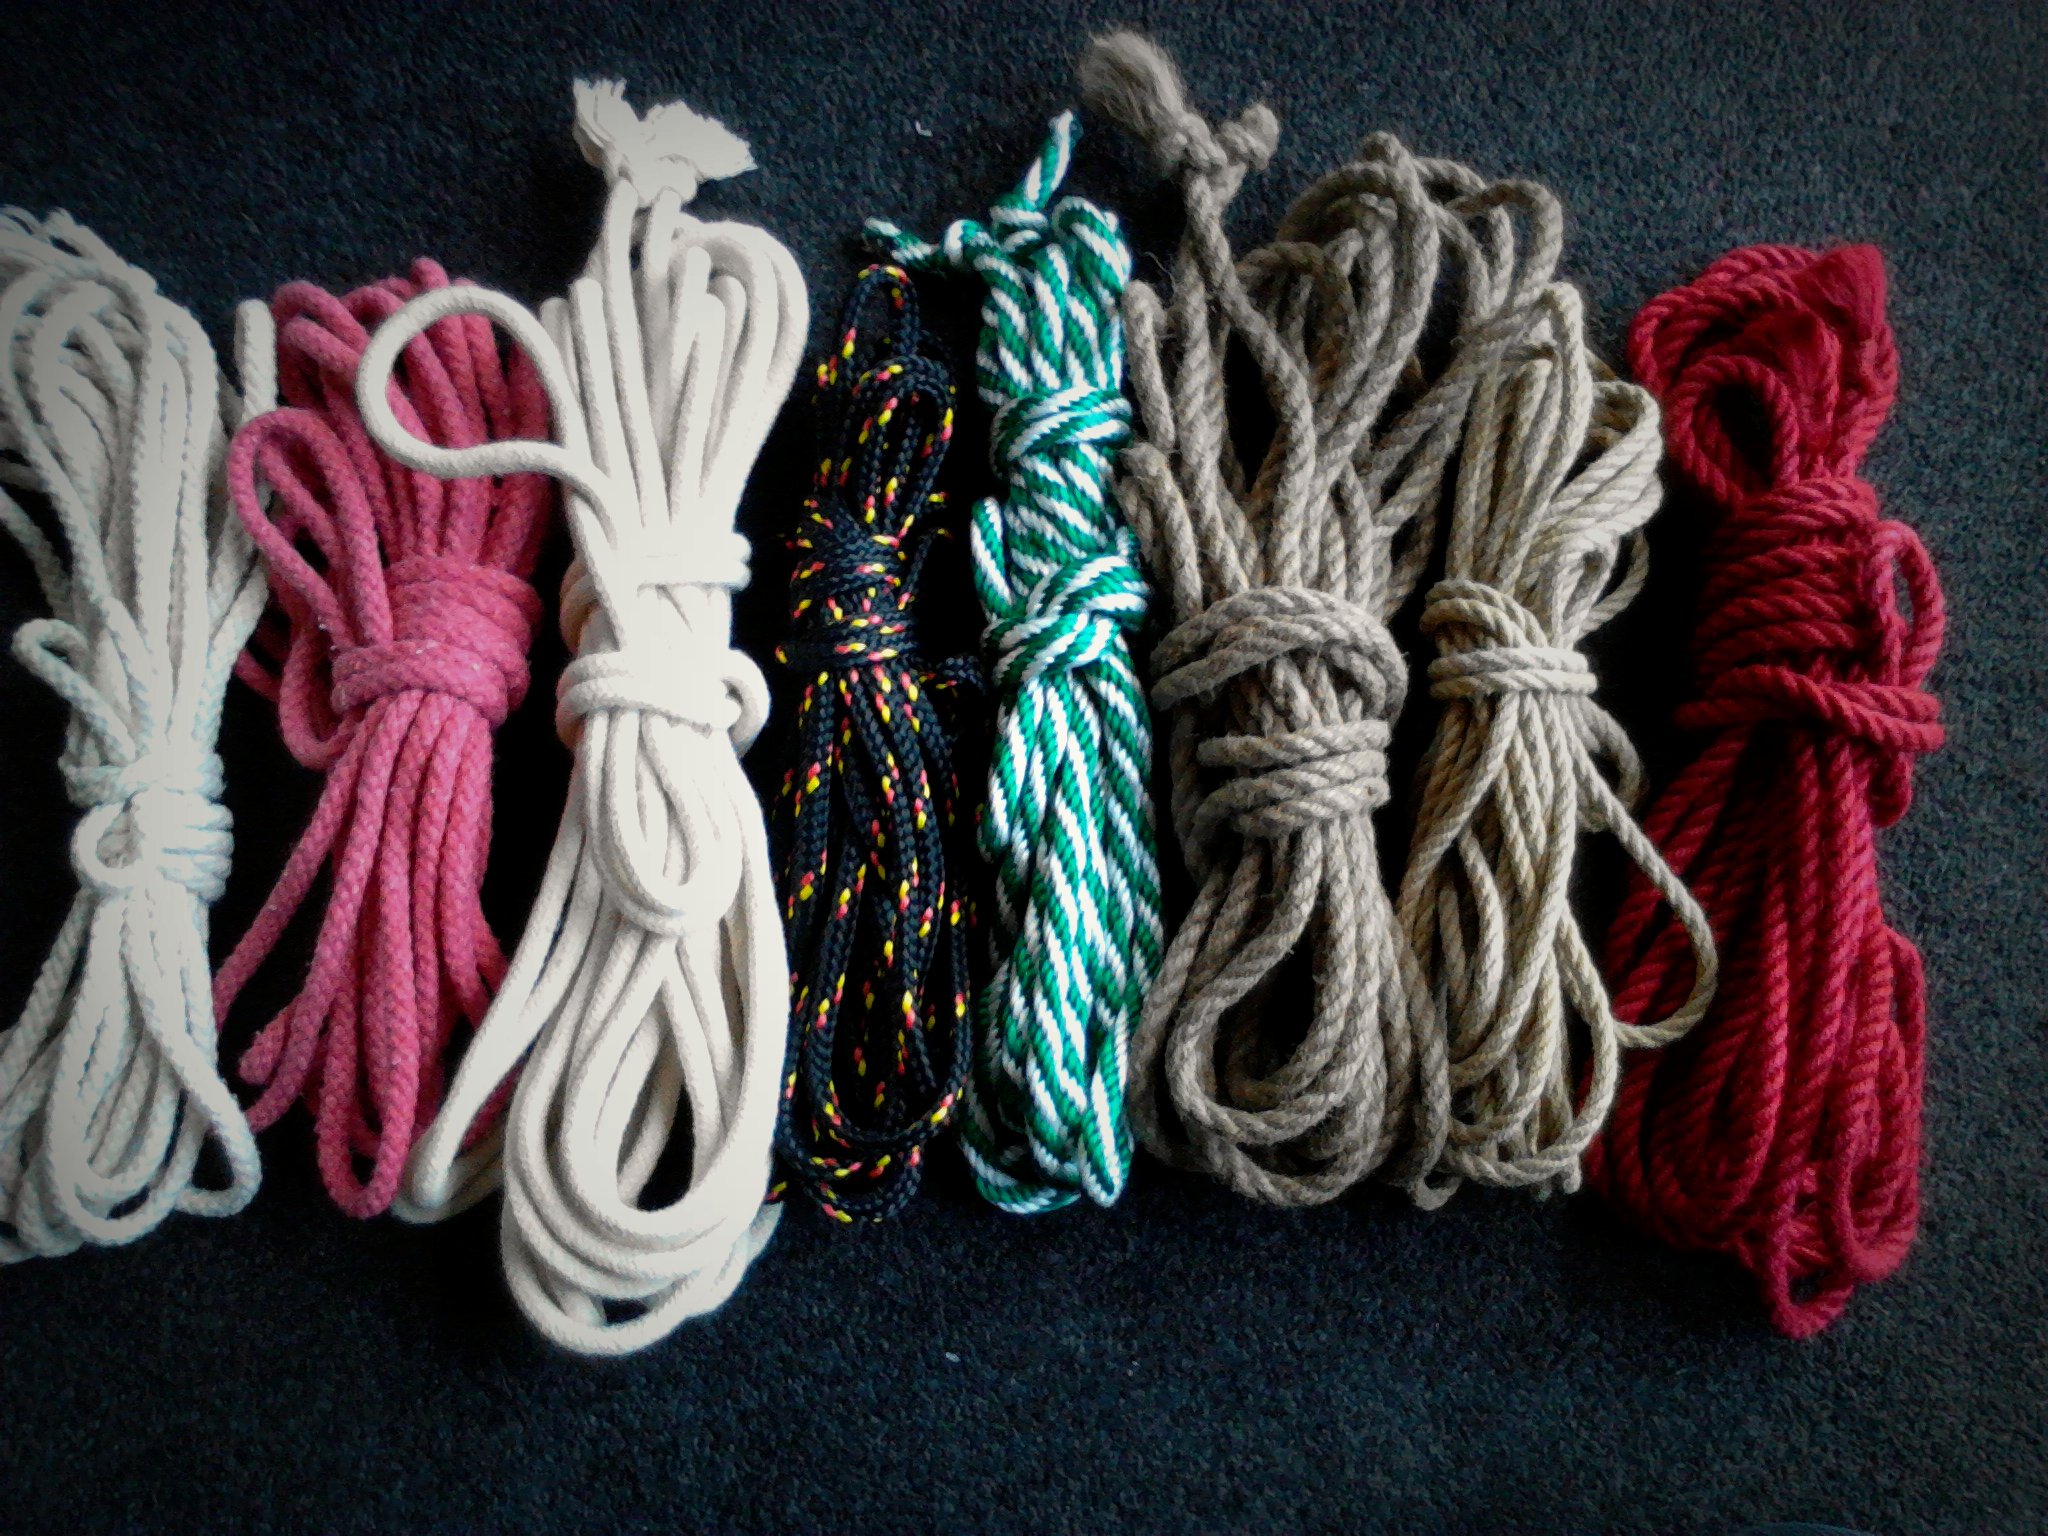 Bondage Rope: What Kind Of Rope Is Best For Bondage? : Rope